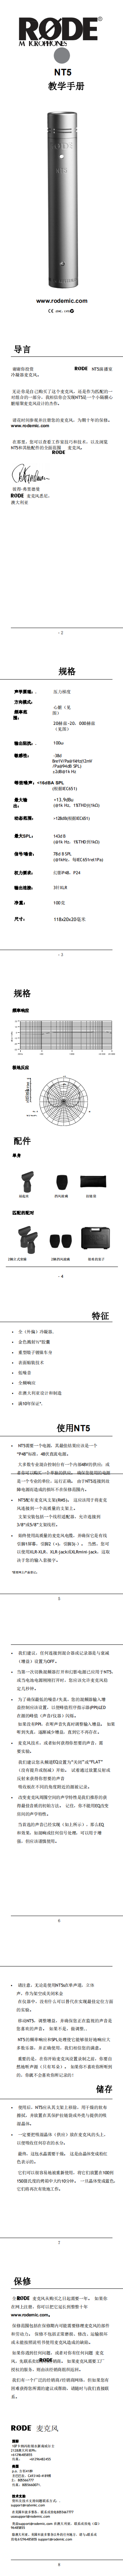 NT5 MP_product_manual_1_8_translate_Chinese_0.png